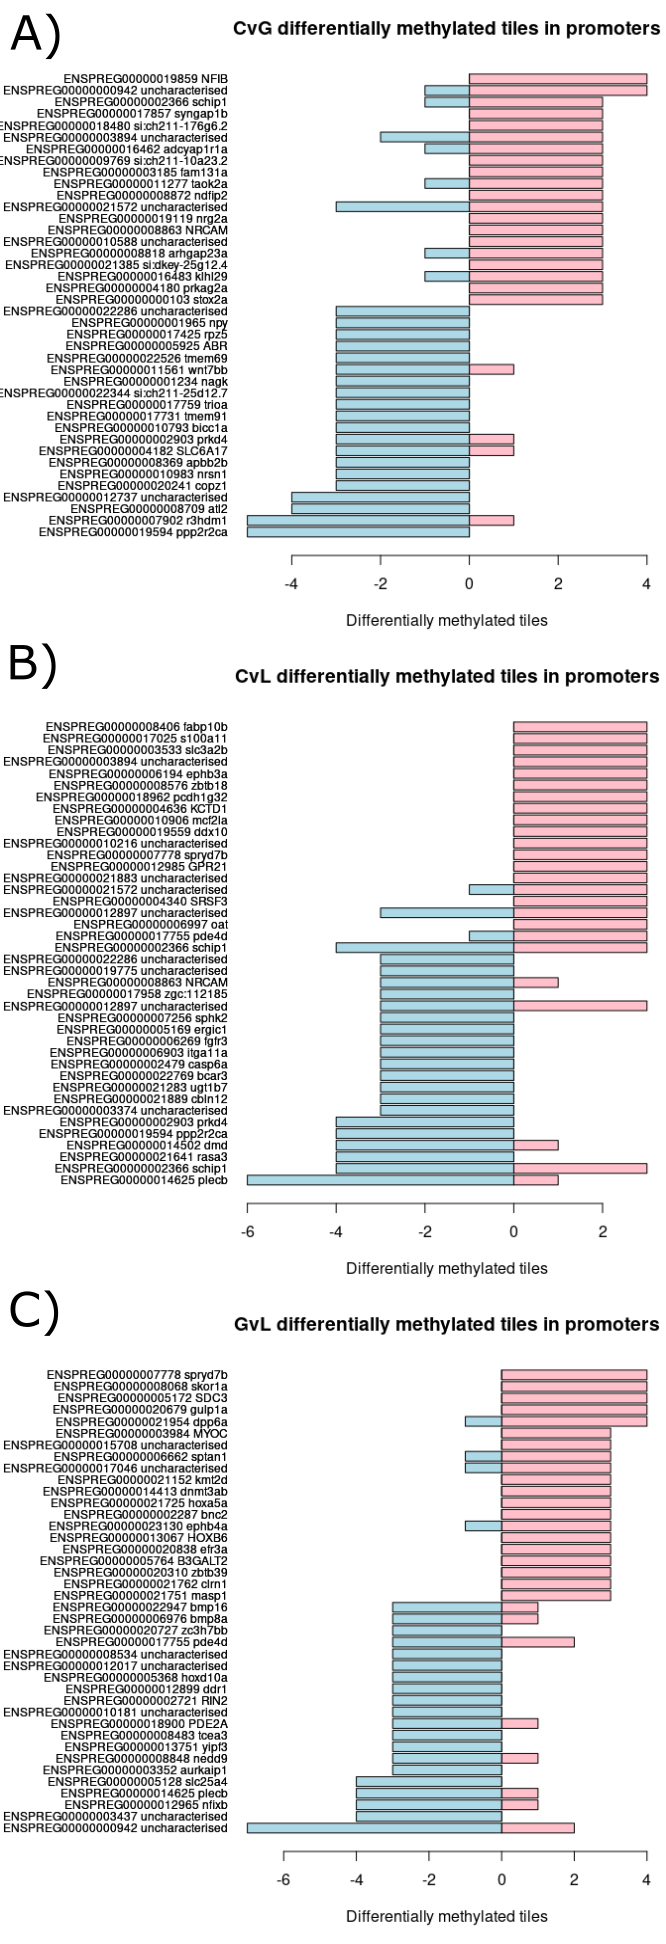 Contains three bar charts which each display the twenty genes with the most differentially methylated tiles annotated to their promoter region which are in the negative direction and the twenty genes with the most differentially methylated tiles annotated to their promoter region which are in the positive direction from each light condition comparison. (A) Bar chart created using clear versus green comparison. (B)  Bar chart created using clear versus lilac comparison. (C) Bar chart created using green versus lilac comparison.